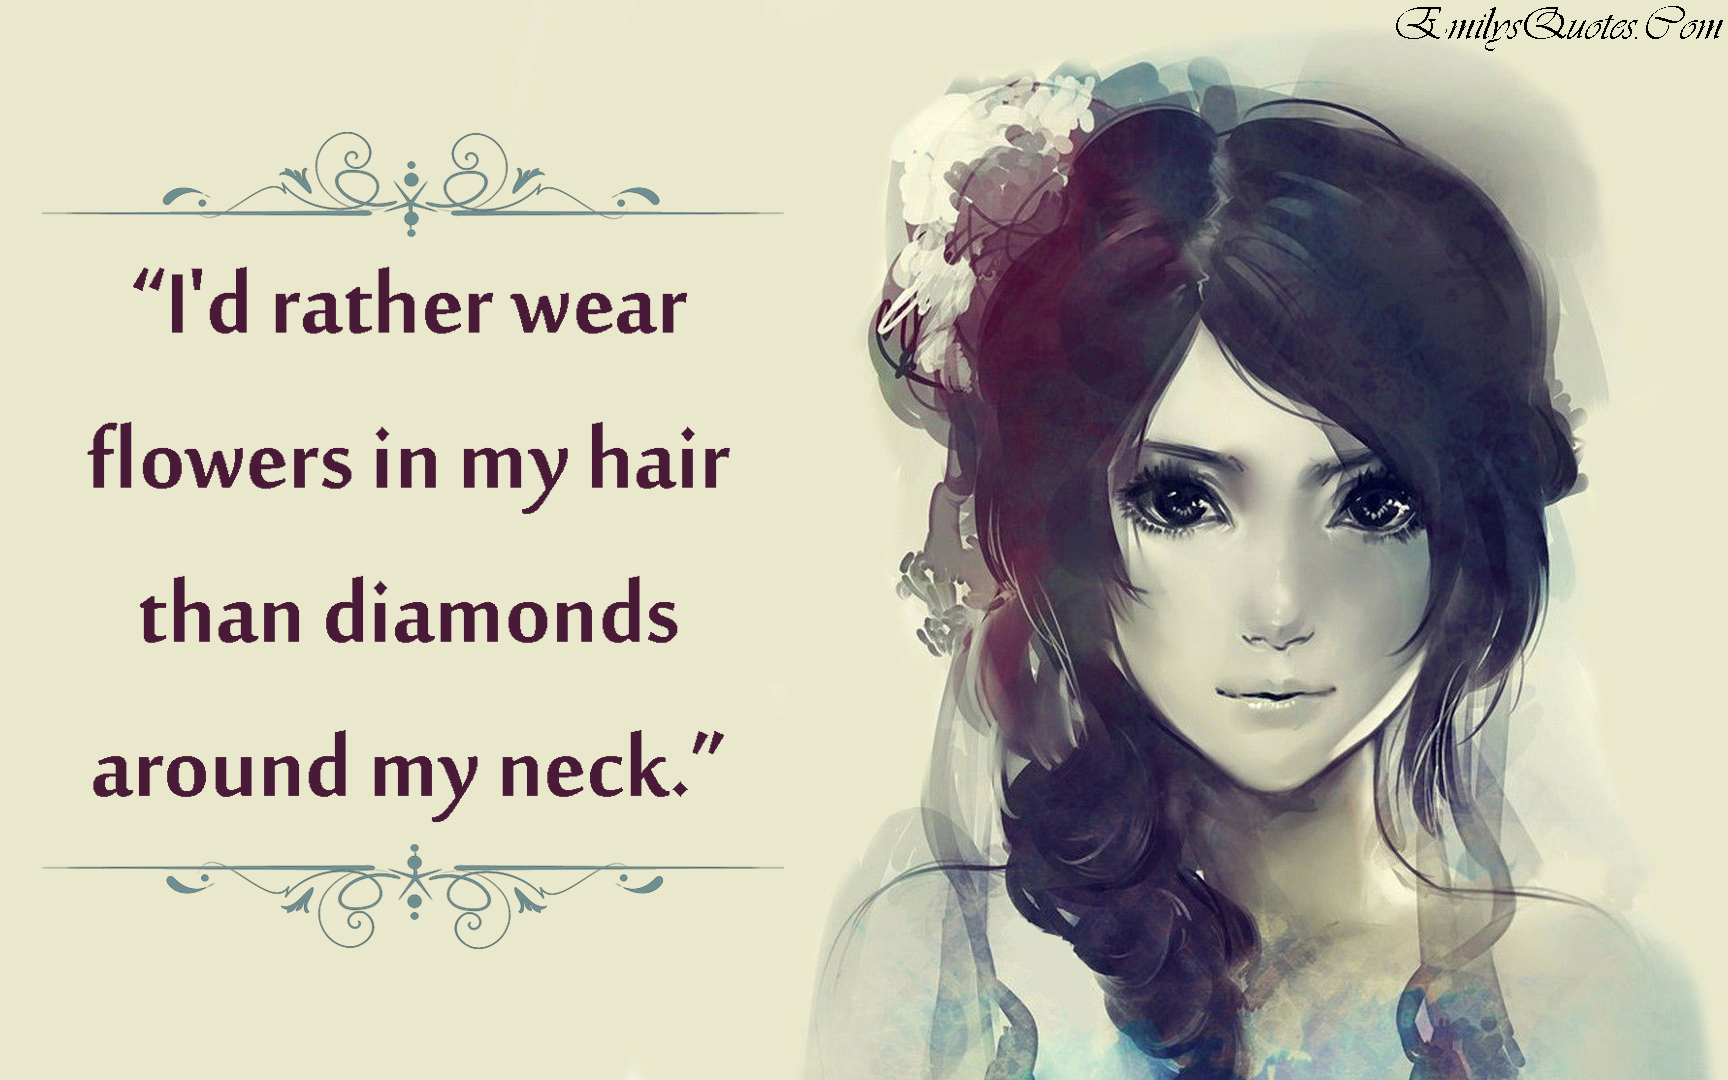 I’d rather wear flowers in my hair than diamonds around my neck